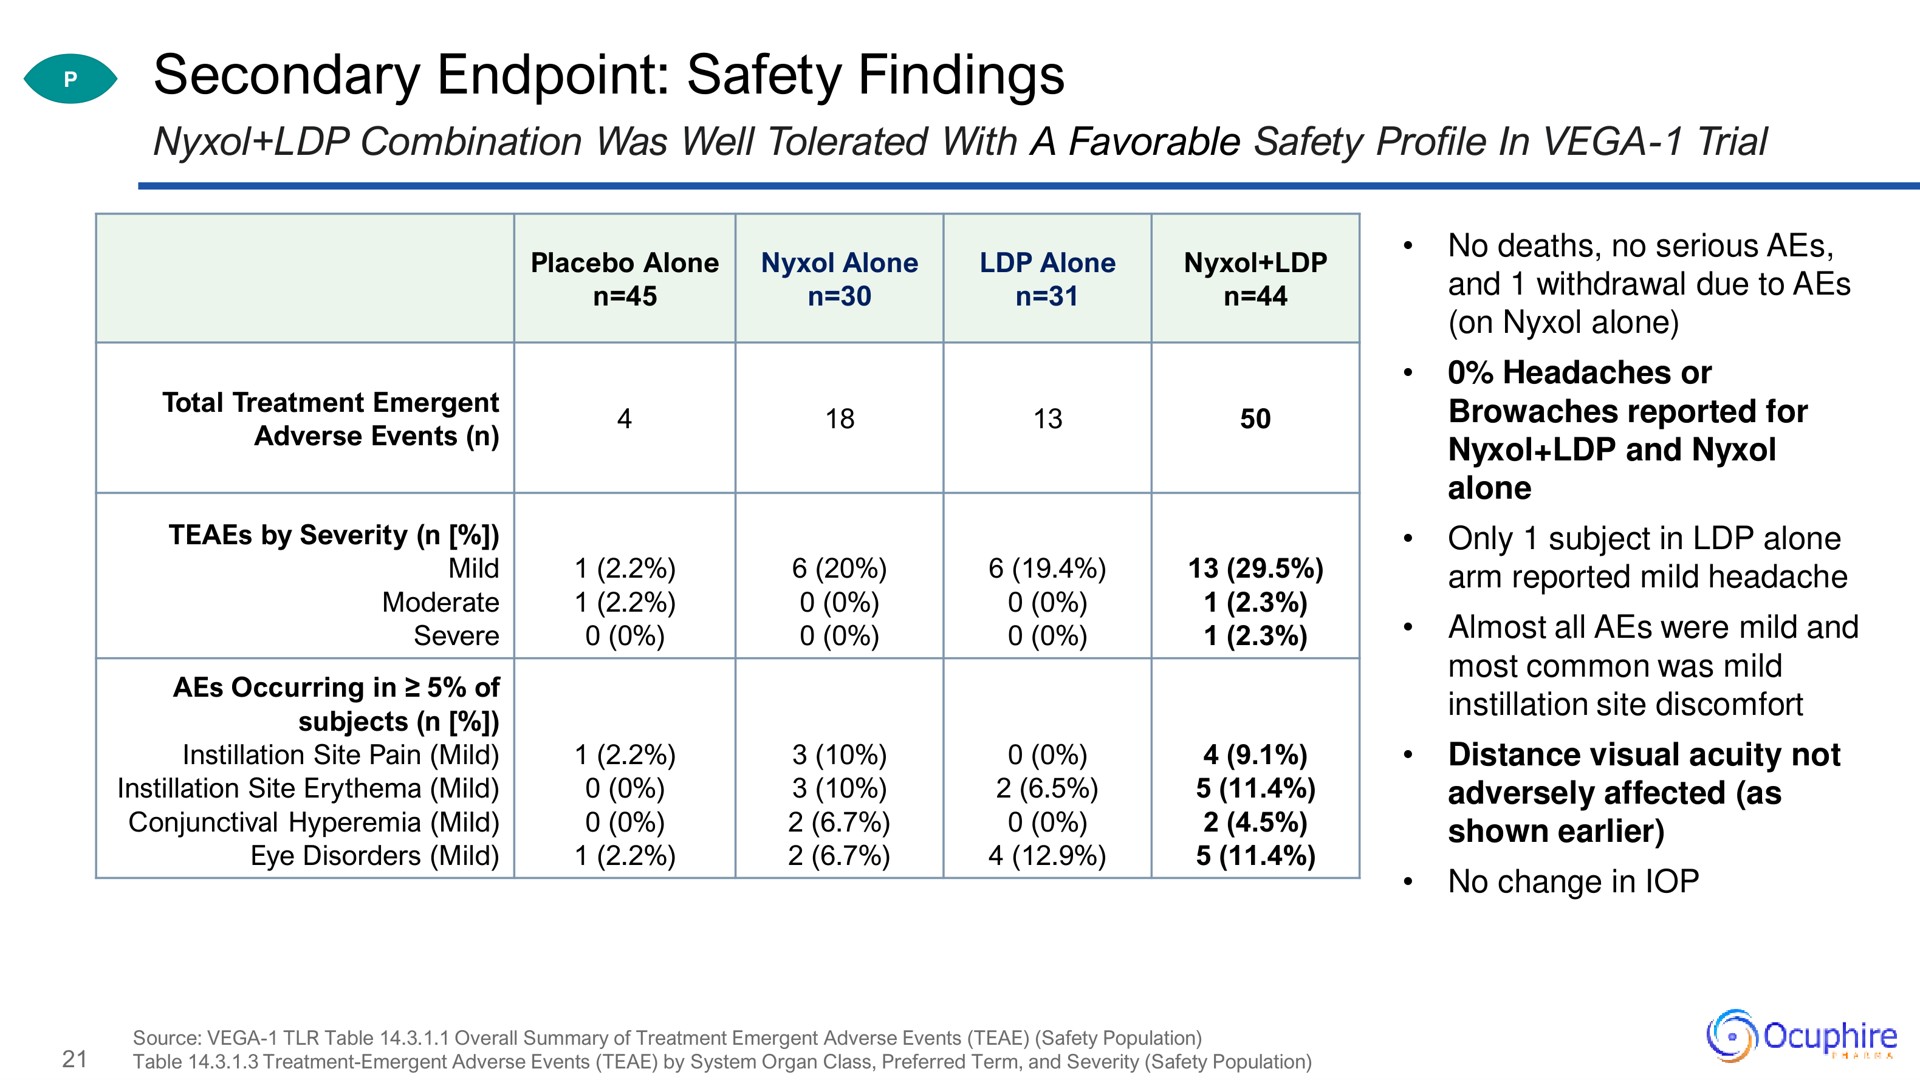 secondary safety findings | Ocuphire Pharma